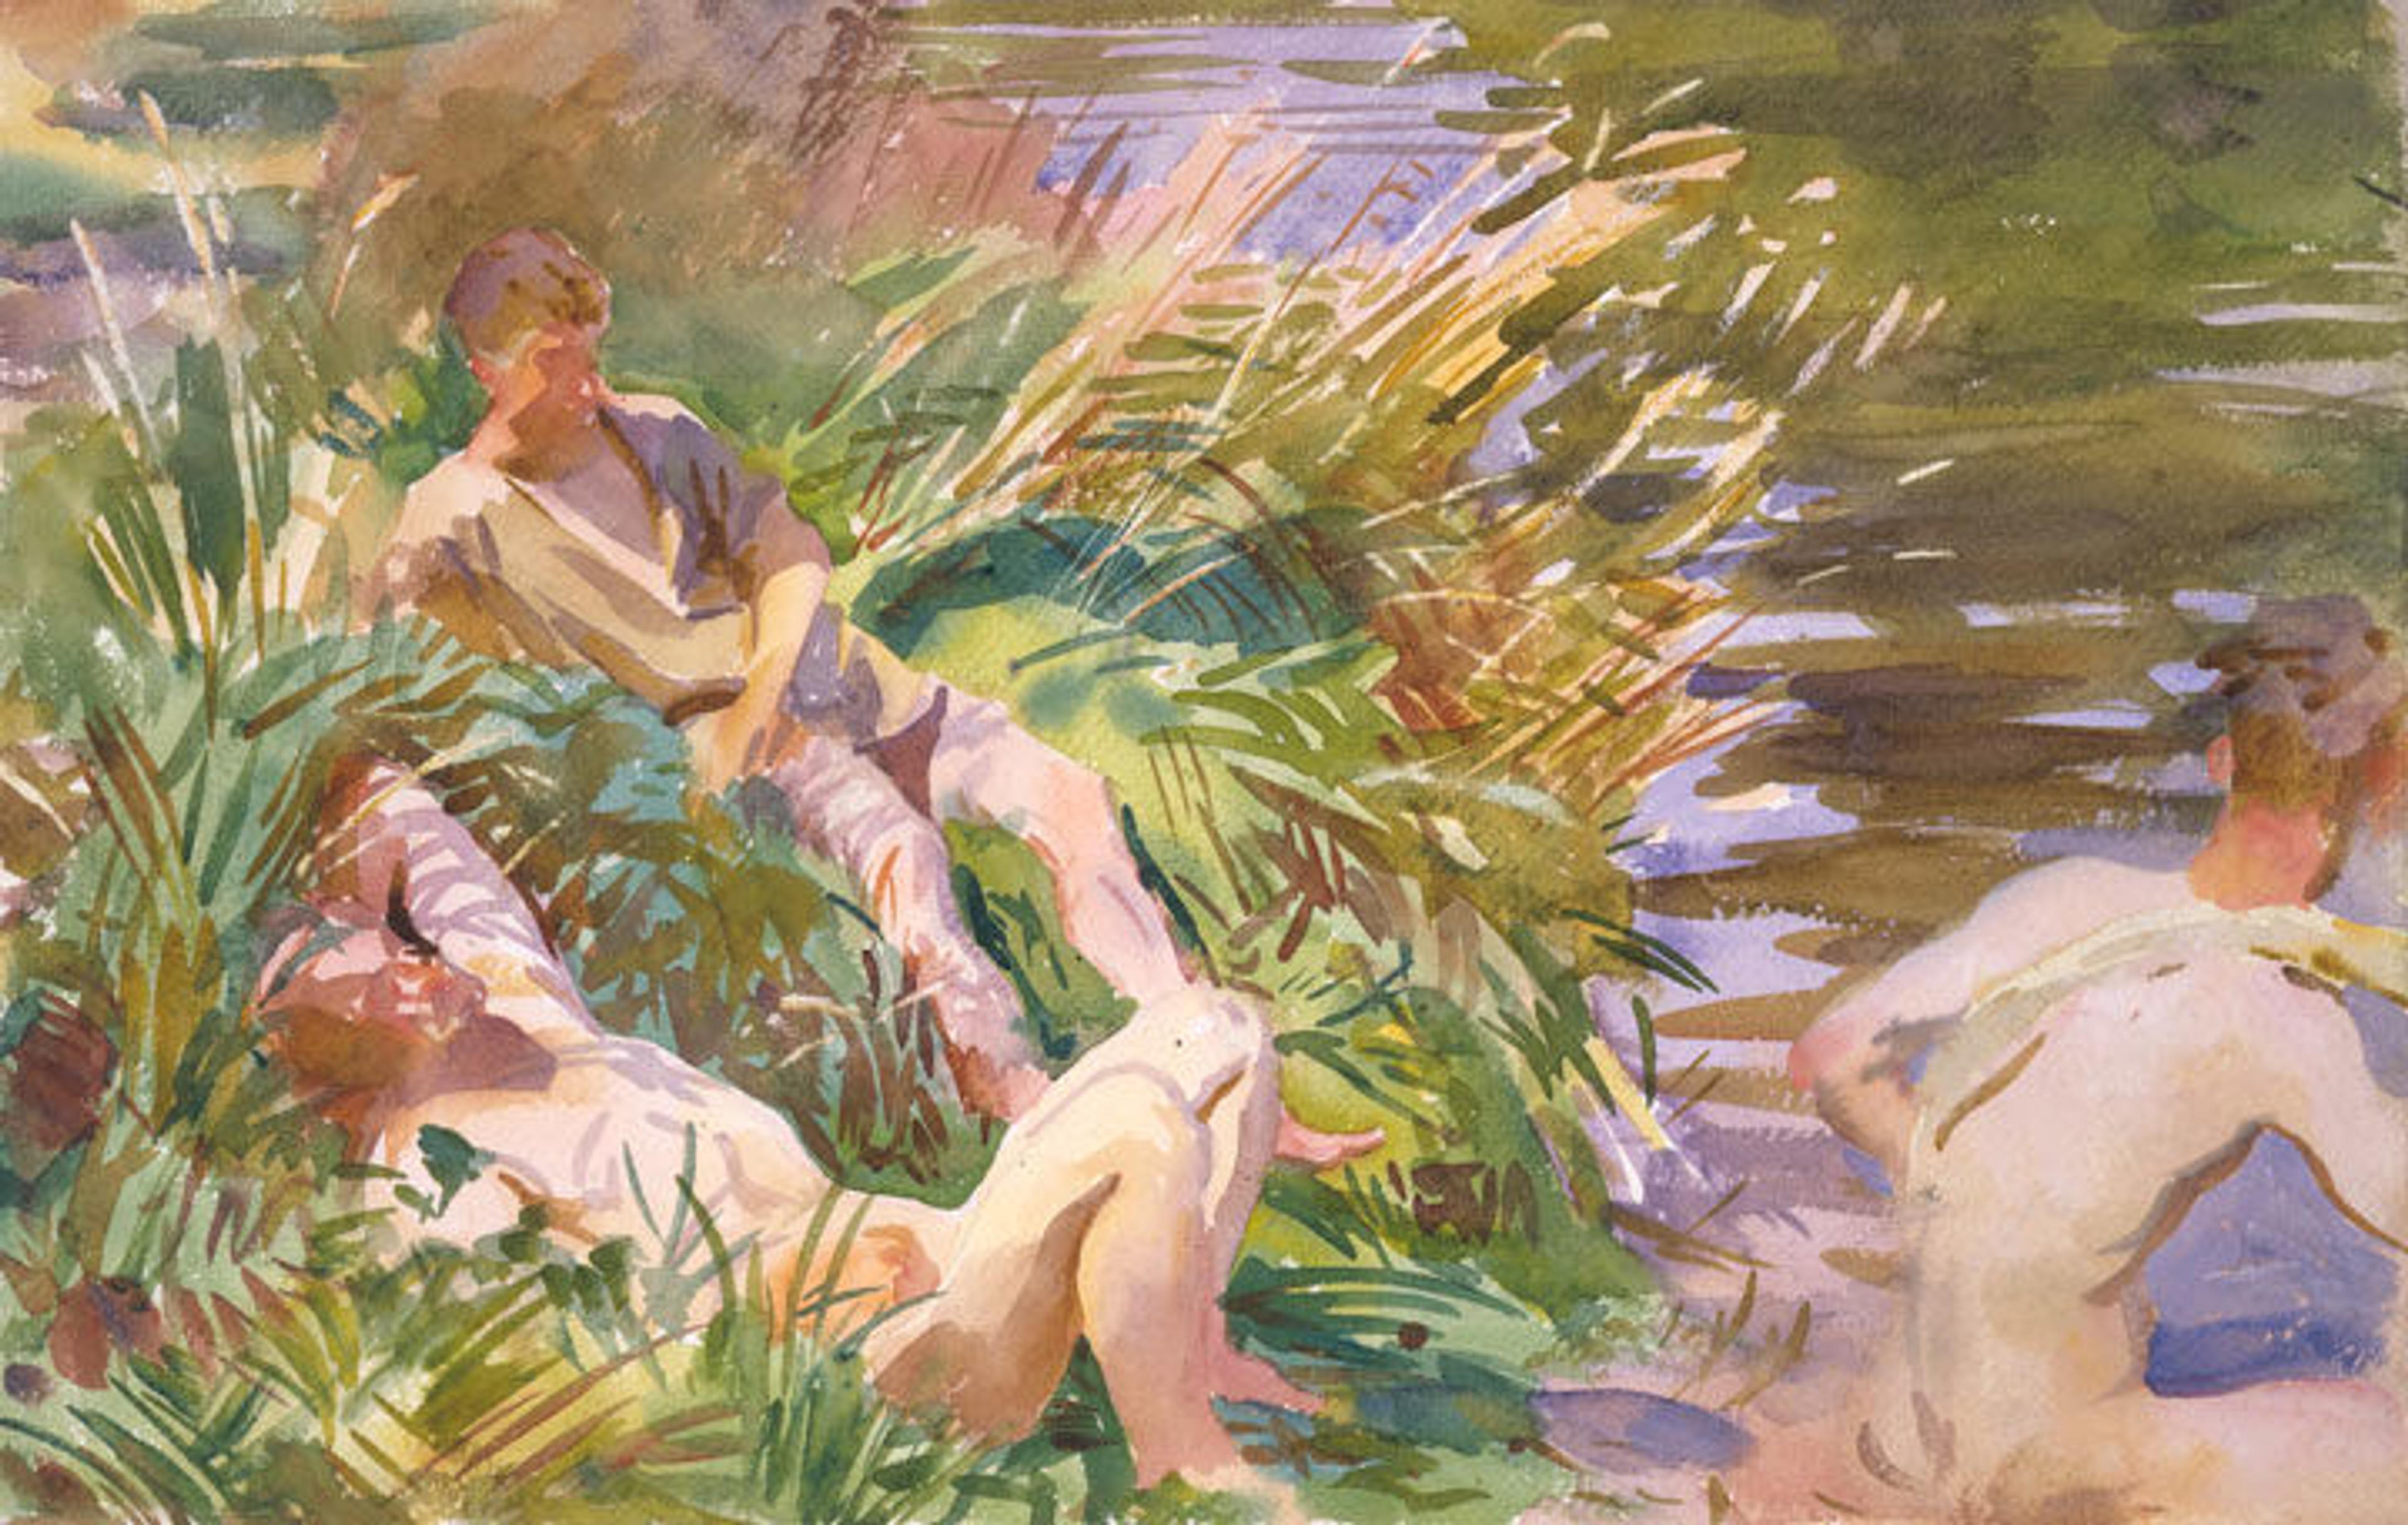 'Tommies Bathing,' a watercolor by John Singer Sargent depicting a group of nude British soldiers bathing in a river